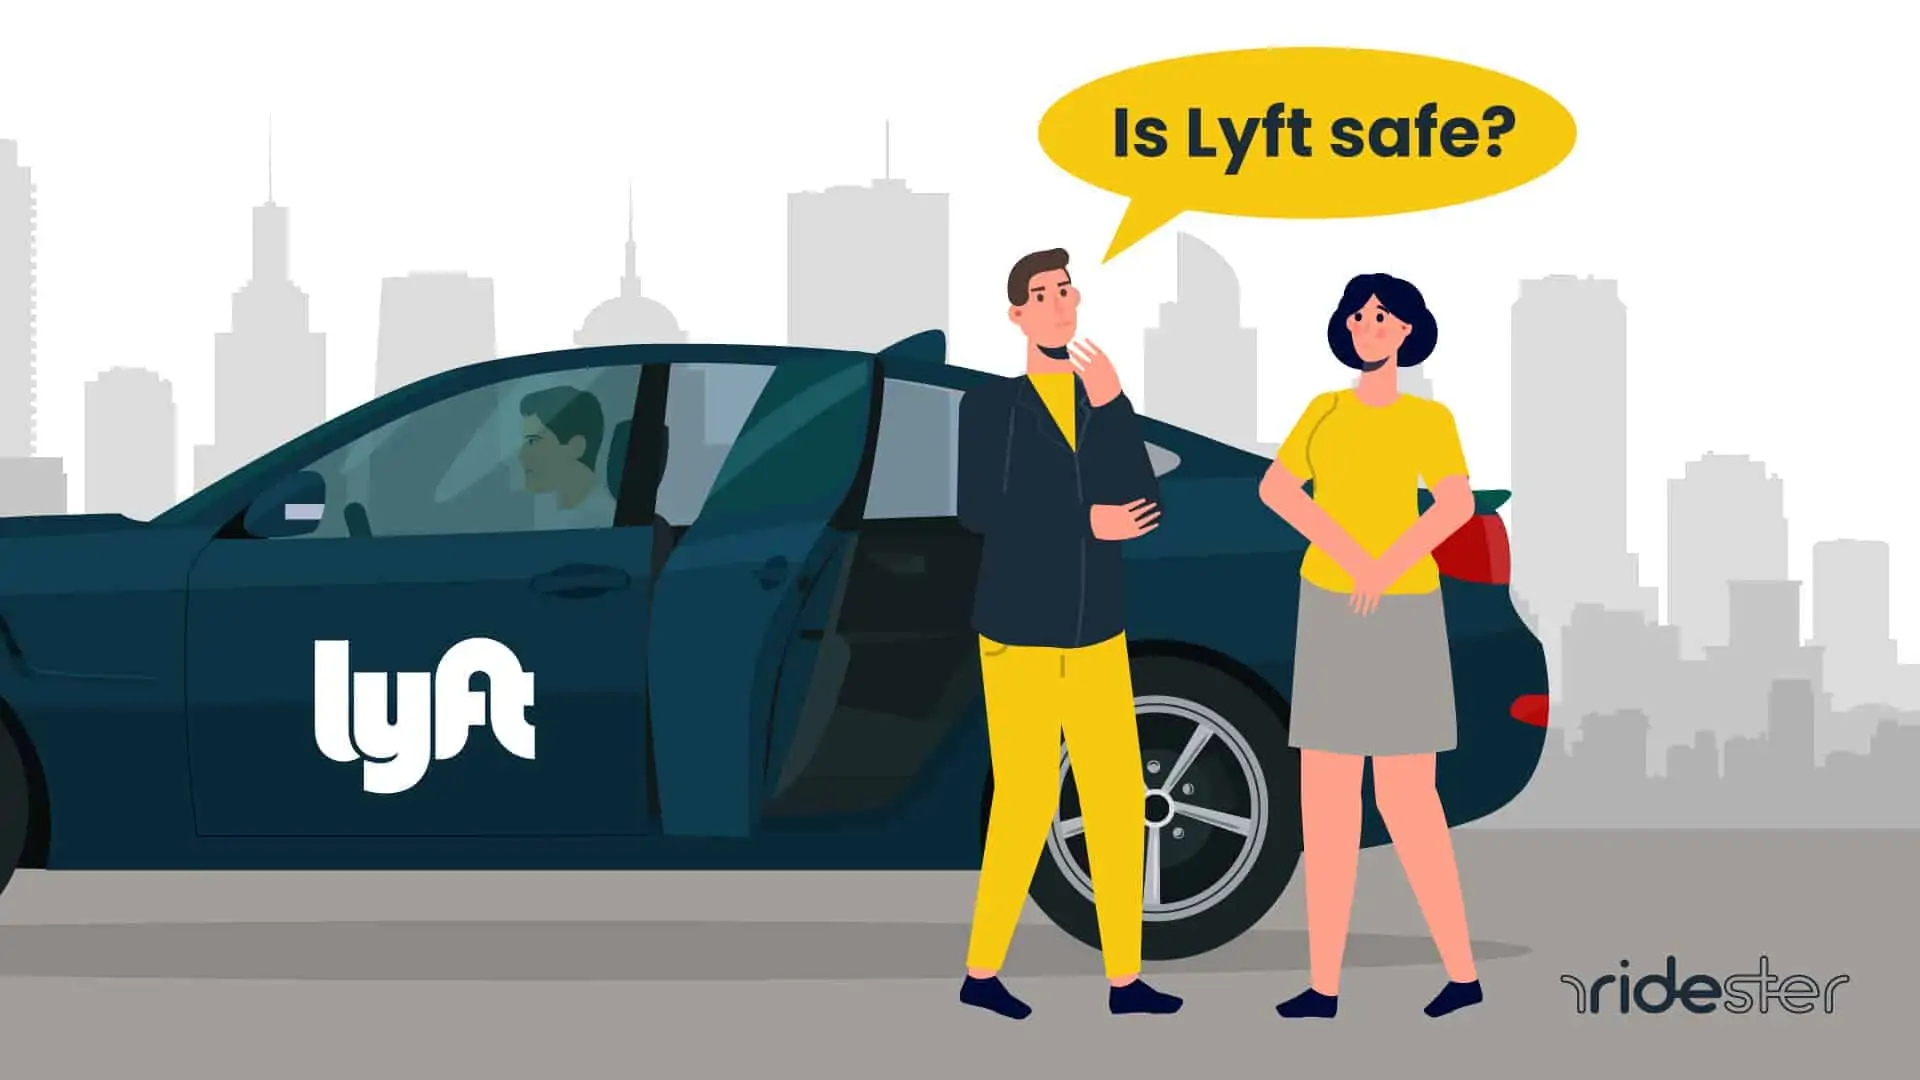 vector graphic showing two people getting into a lyft car and one asking the other "is lyft safe?"